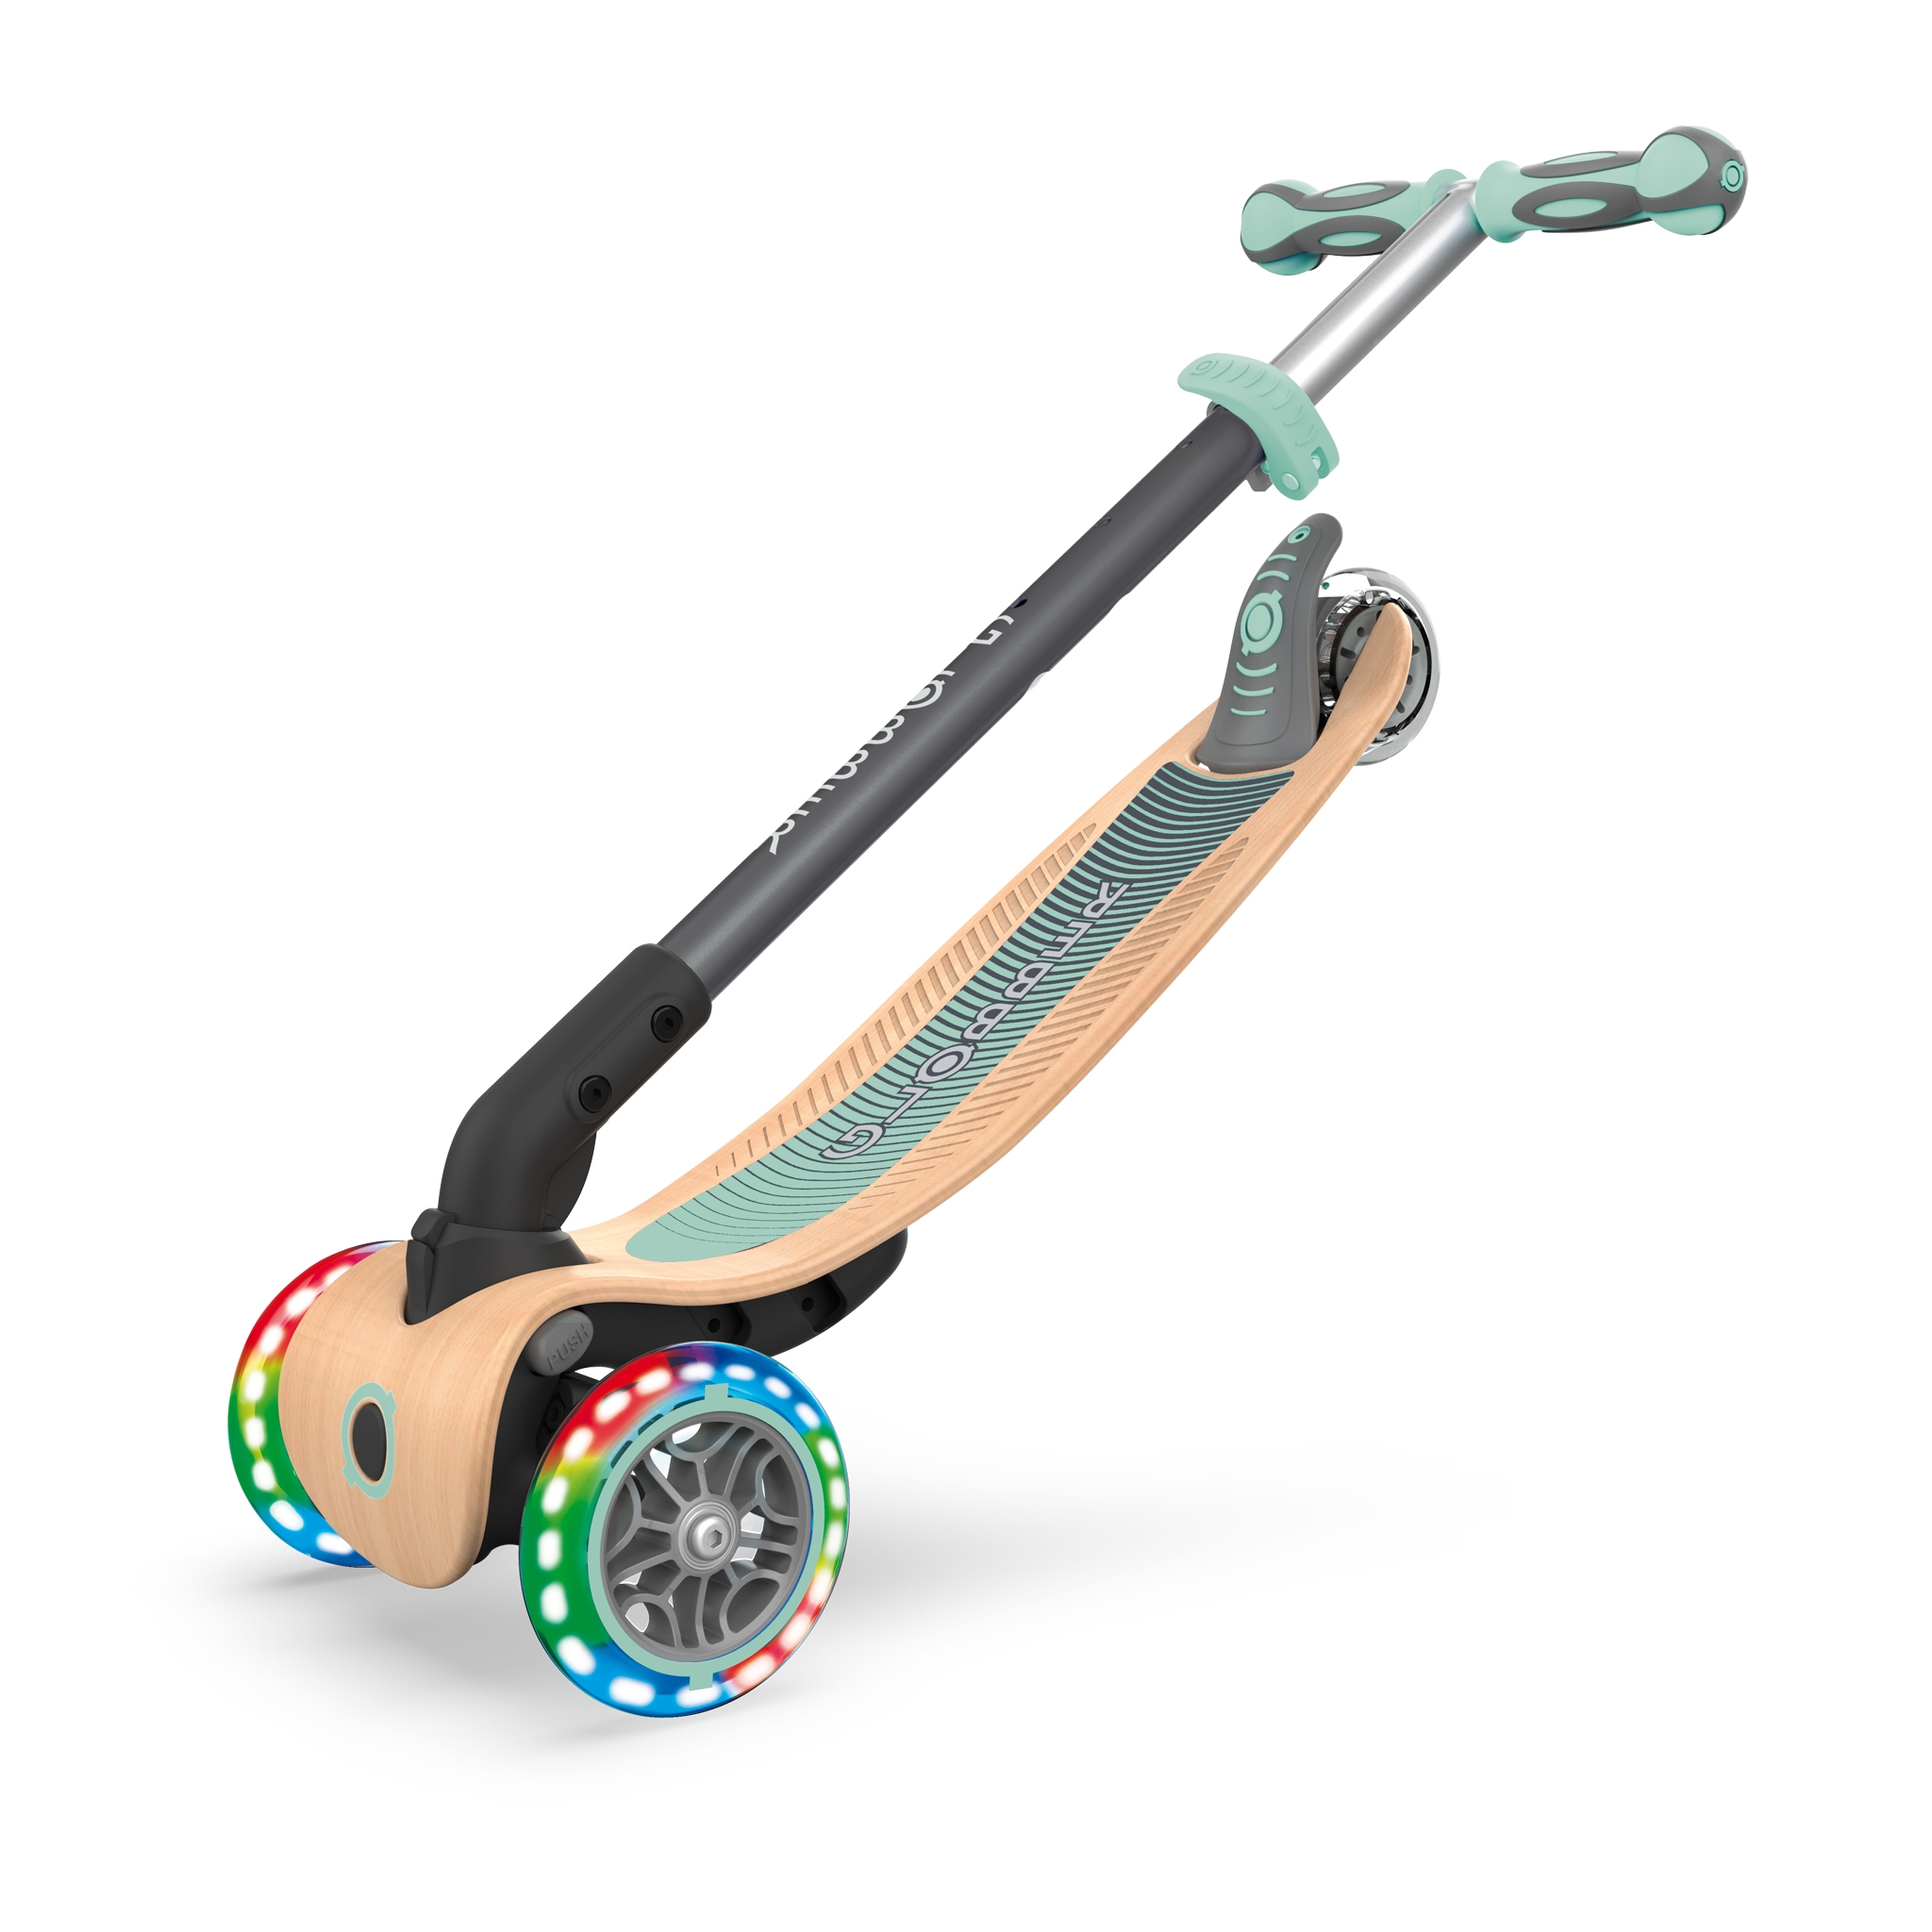 PRIMO-FOLDABLE-WOOD-LIGHTS-3-wheel-foldable-light-up-scooter-with-7-ply-wooden-scooter-deck-trolley-mode-compatible_pastel-green 5